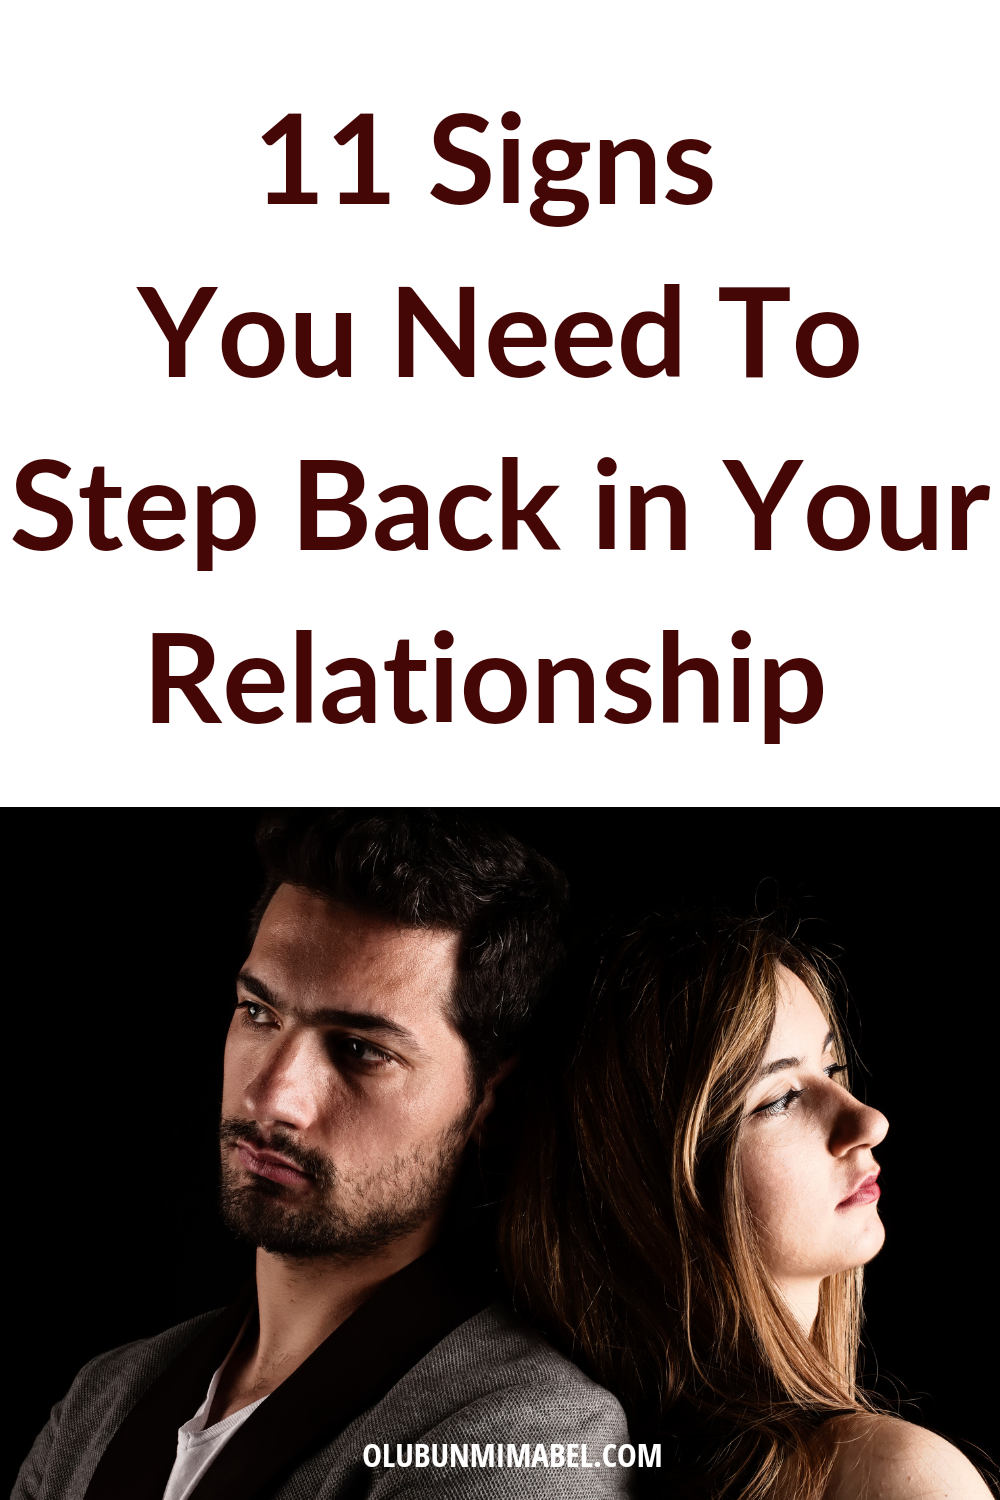  Signs You Need to Step Back in a Relationship